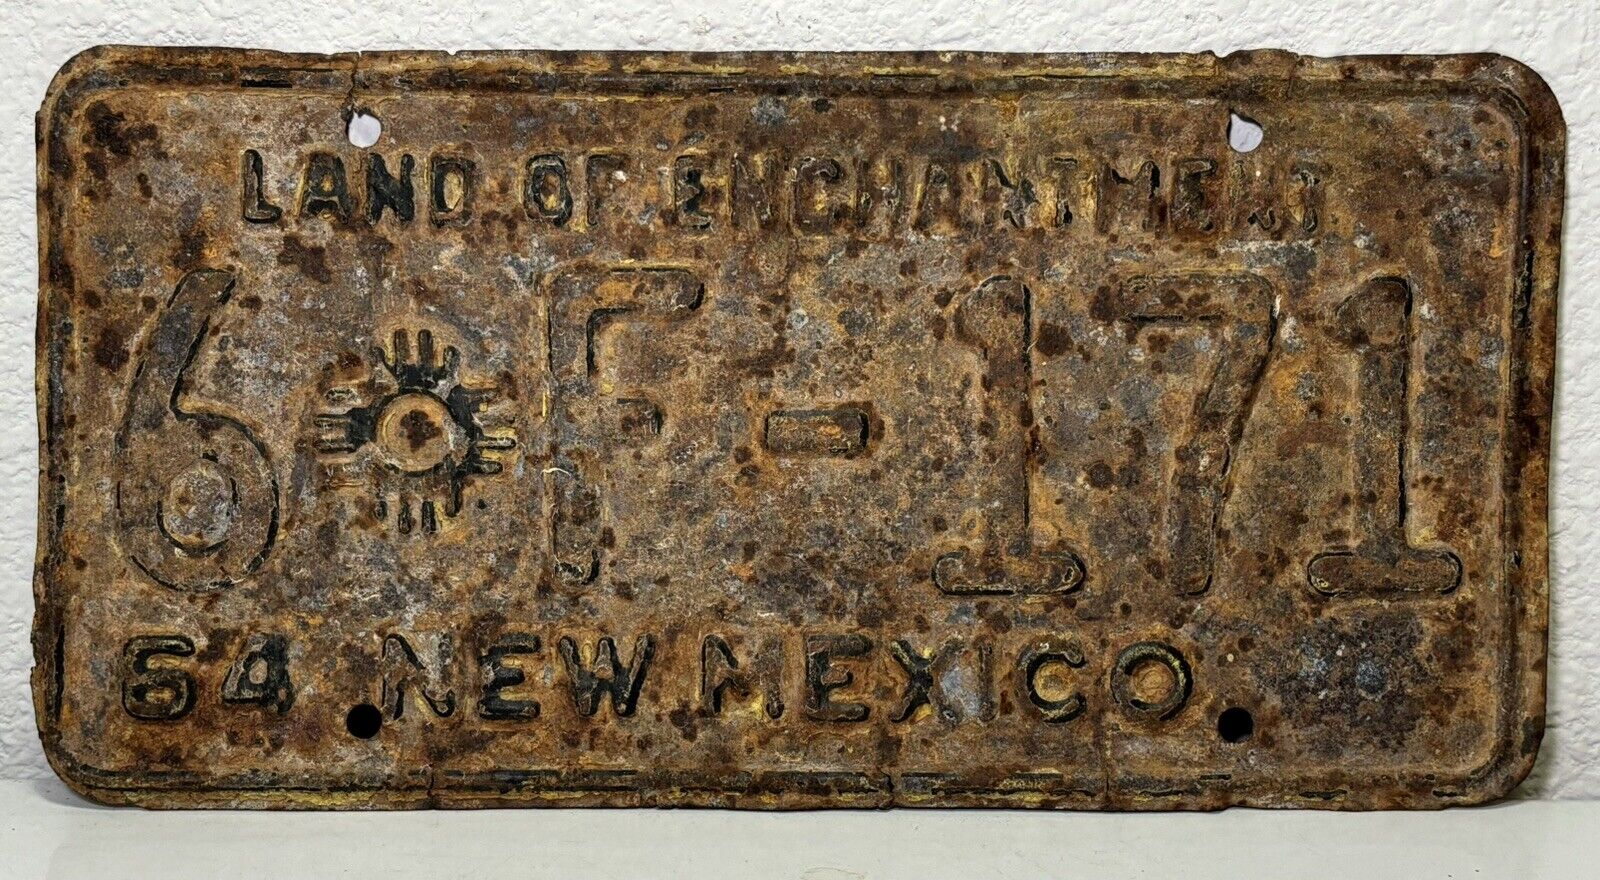 Old 64 Rat Rod Antique Muscle Car Vintage 1964 New Mexico license Plate 6 F-171